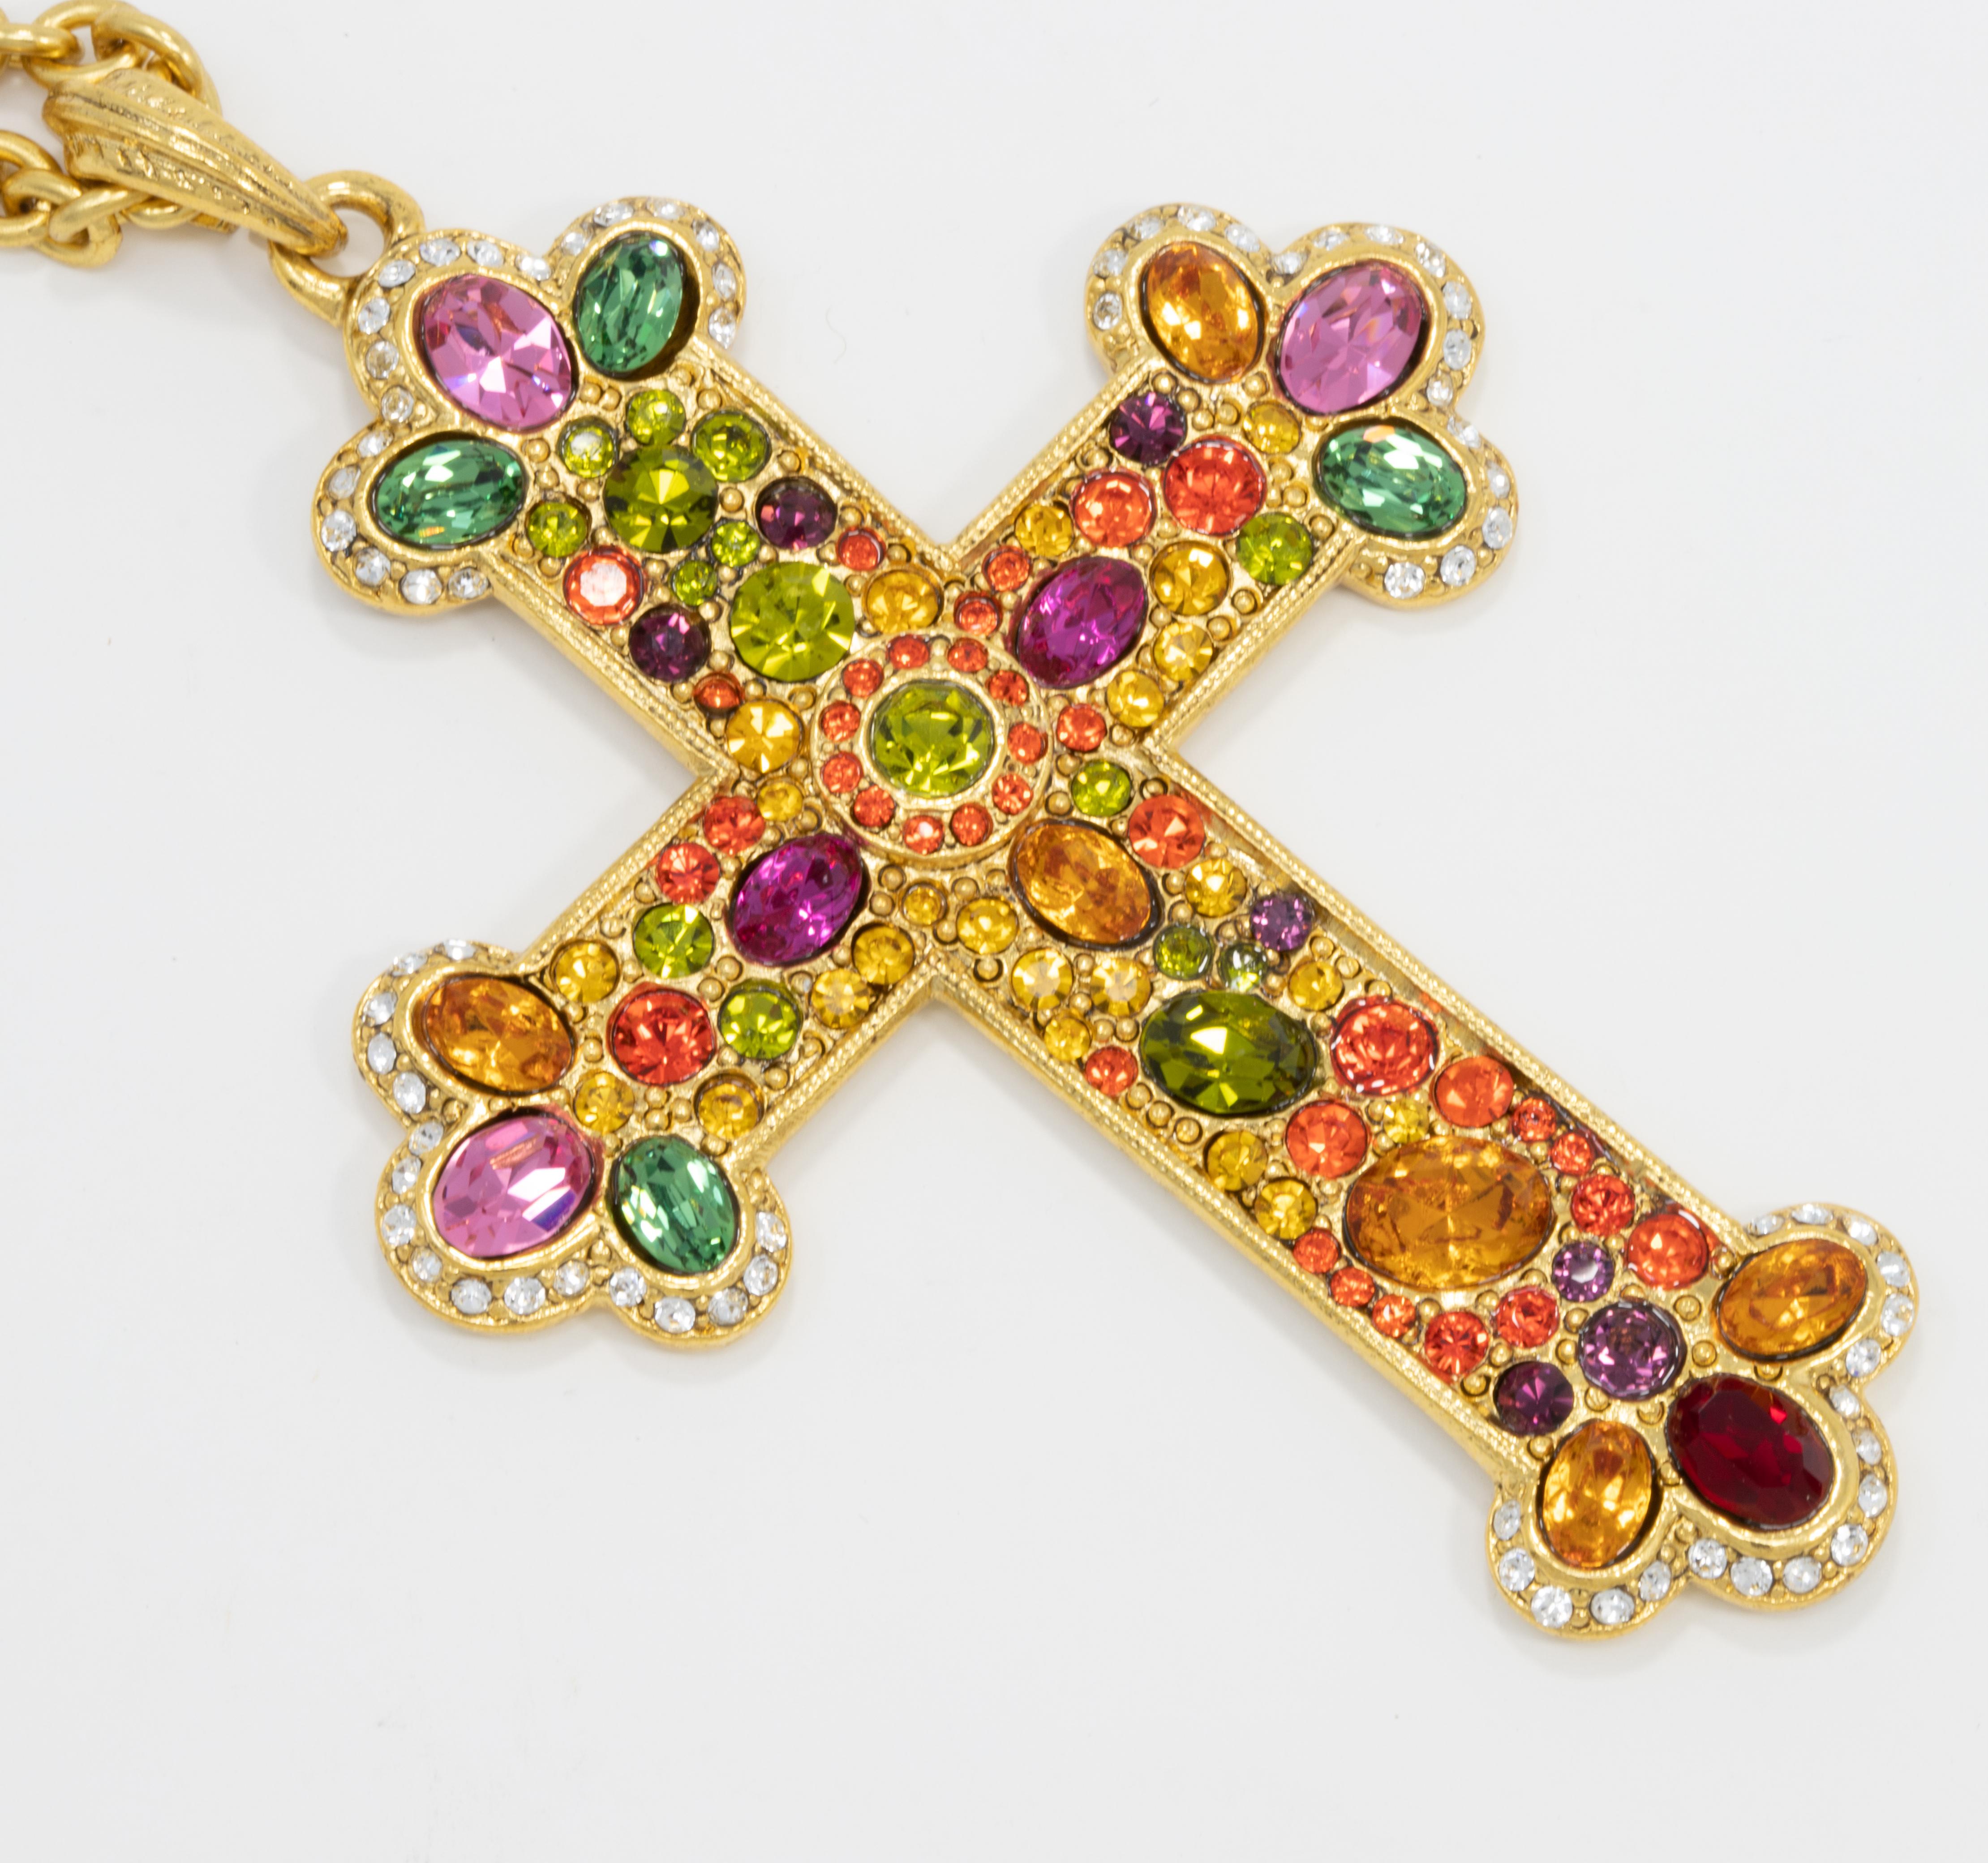 Stunning golden pendant rope necklace from Kenneth Jay Lane! The large statement cross is decorated with colorful crystals

Necklace is 27.5 inches around.

Marks: KJL